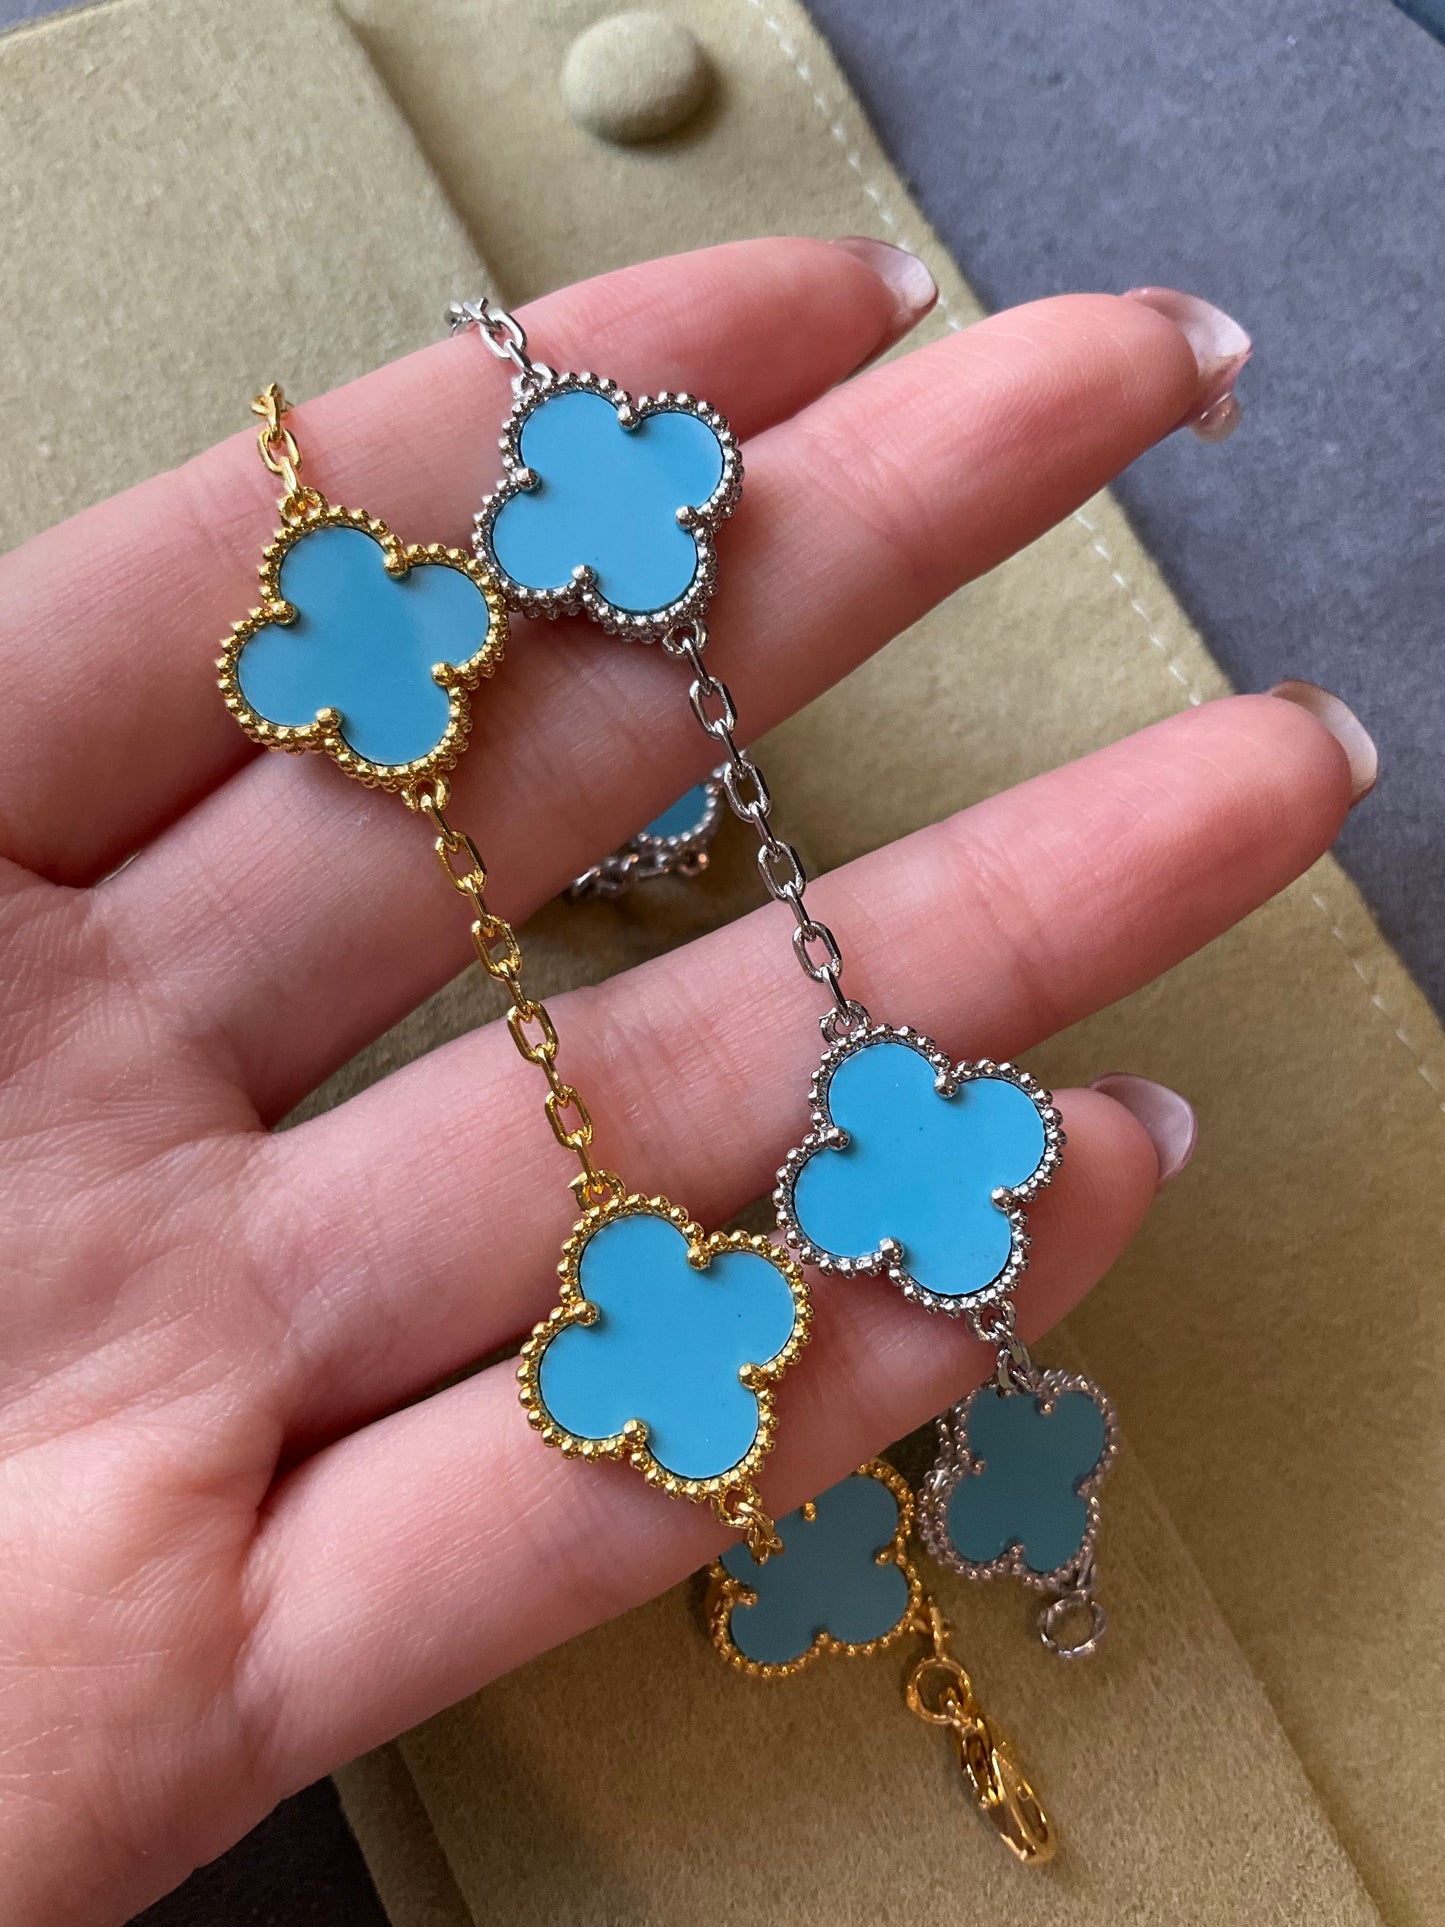 5 motifs 15mm clover turquoise clover bracelet 925 silver with 18k gold plated 7.5 inches - ParadiseKissCo